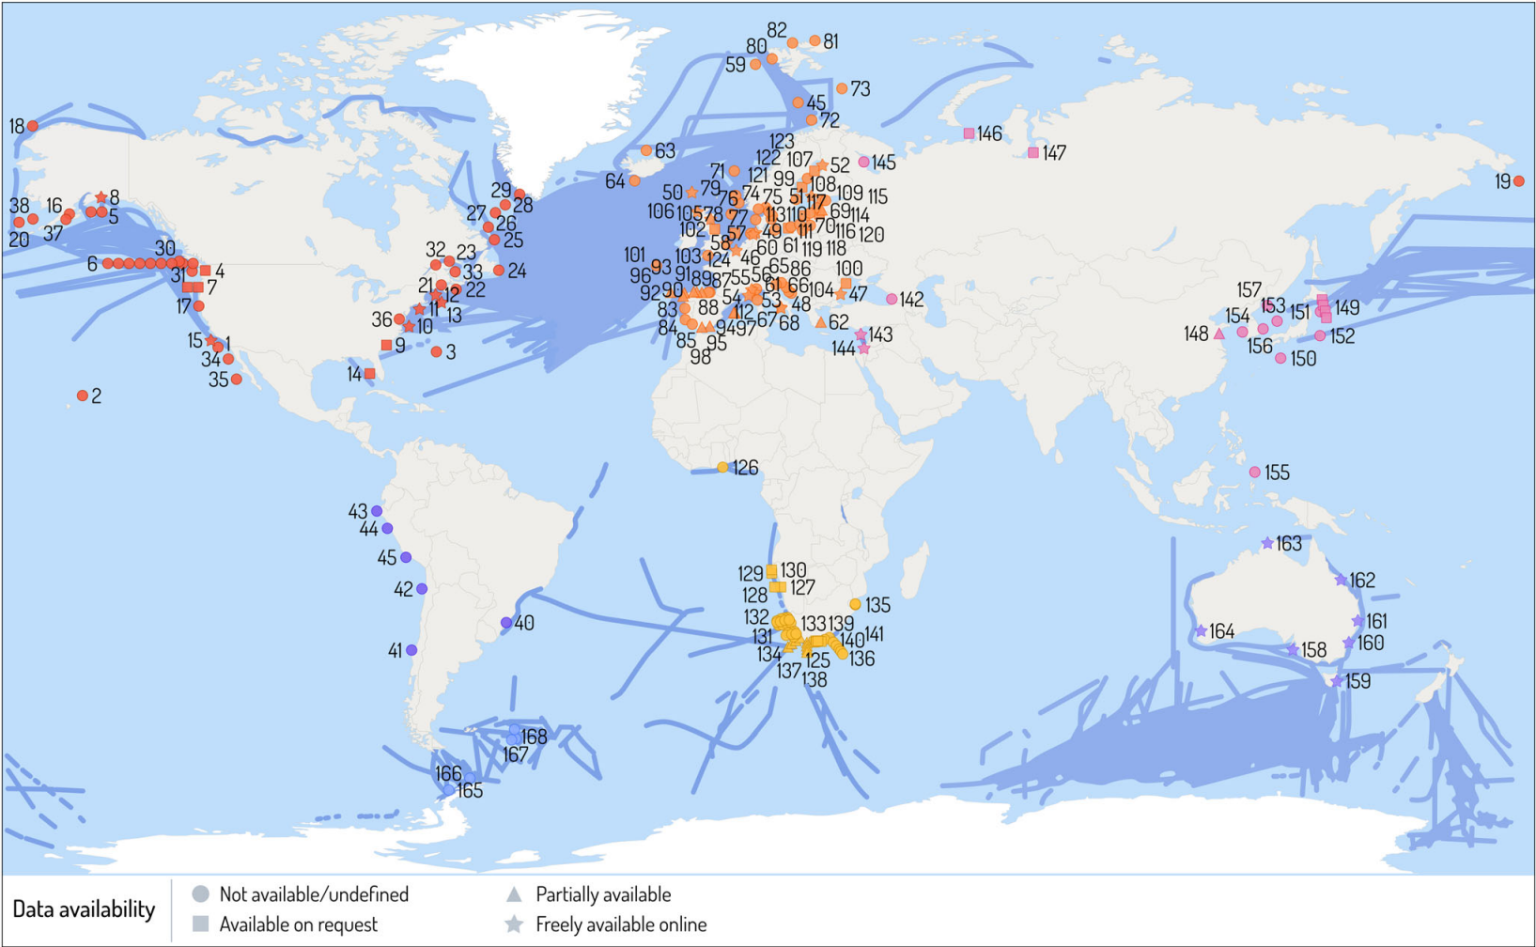 Map of long-term monitoring programs for zooplankton in the global ocean